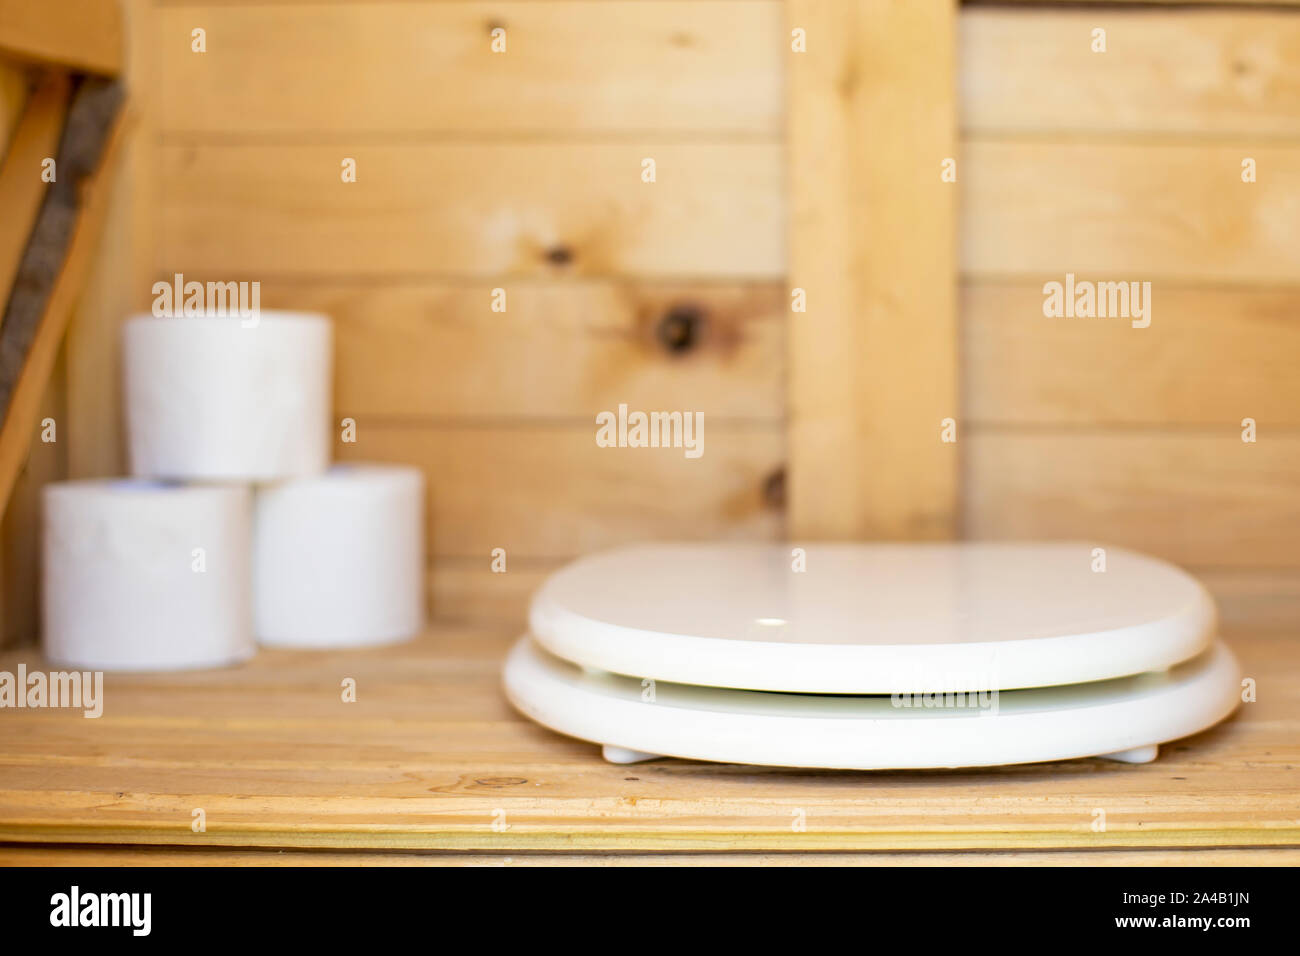 Modern toilet seat of white color in a rustic, wooden restroom (WC), in the background rolls of paper. Close-up. Stock Photo